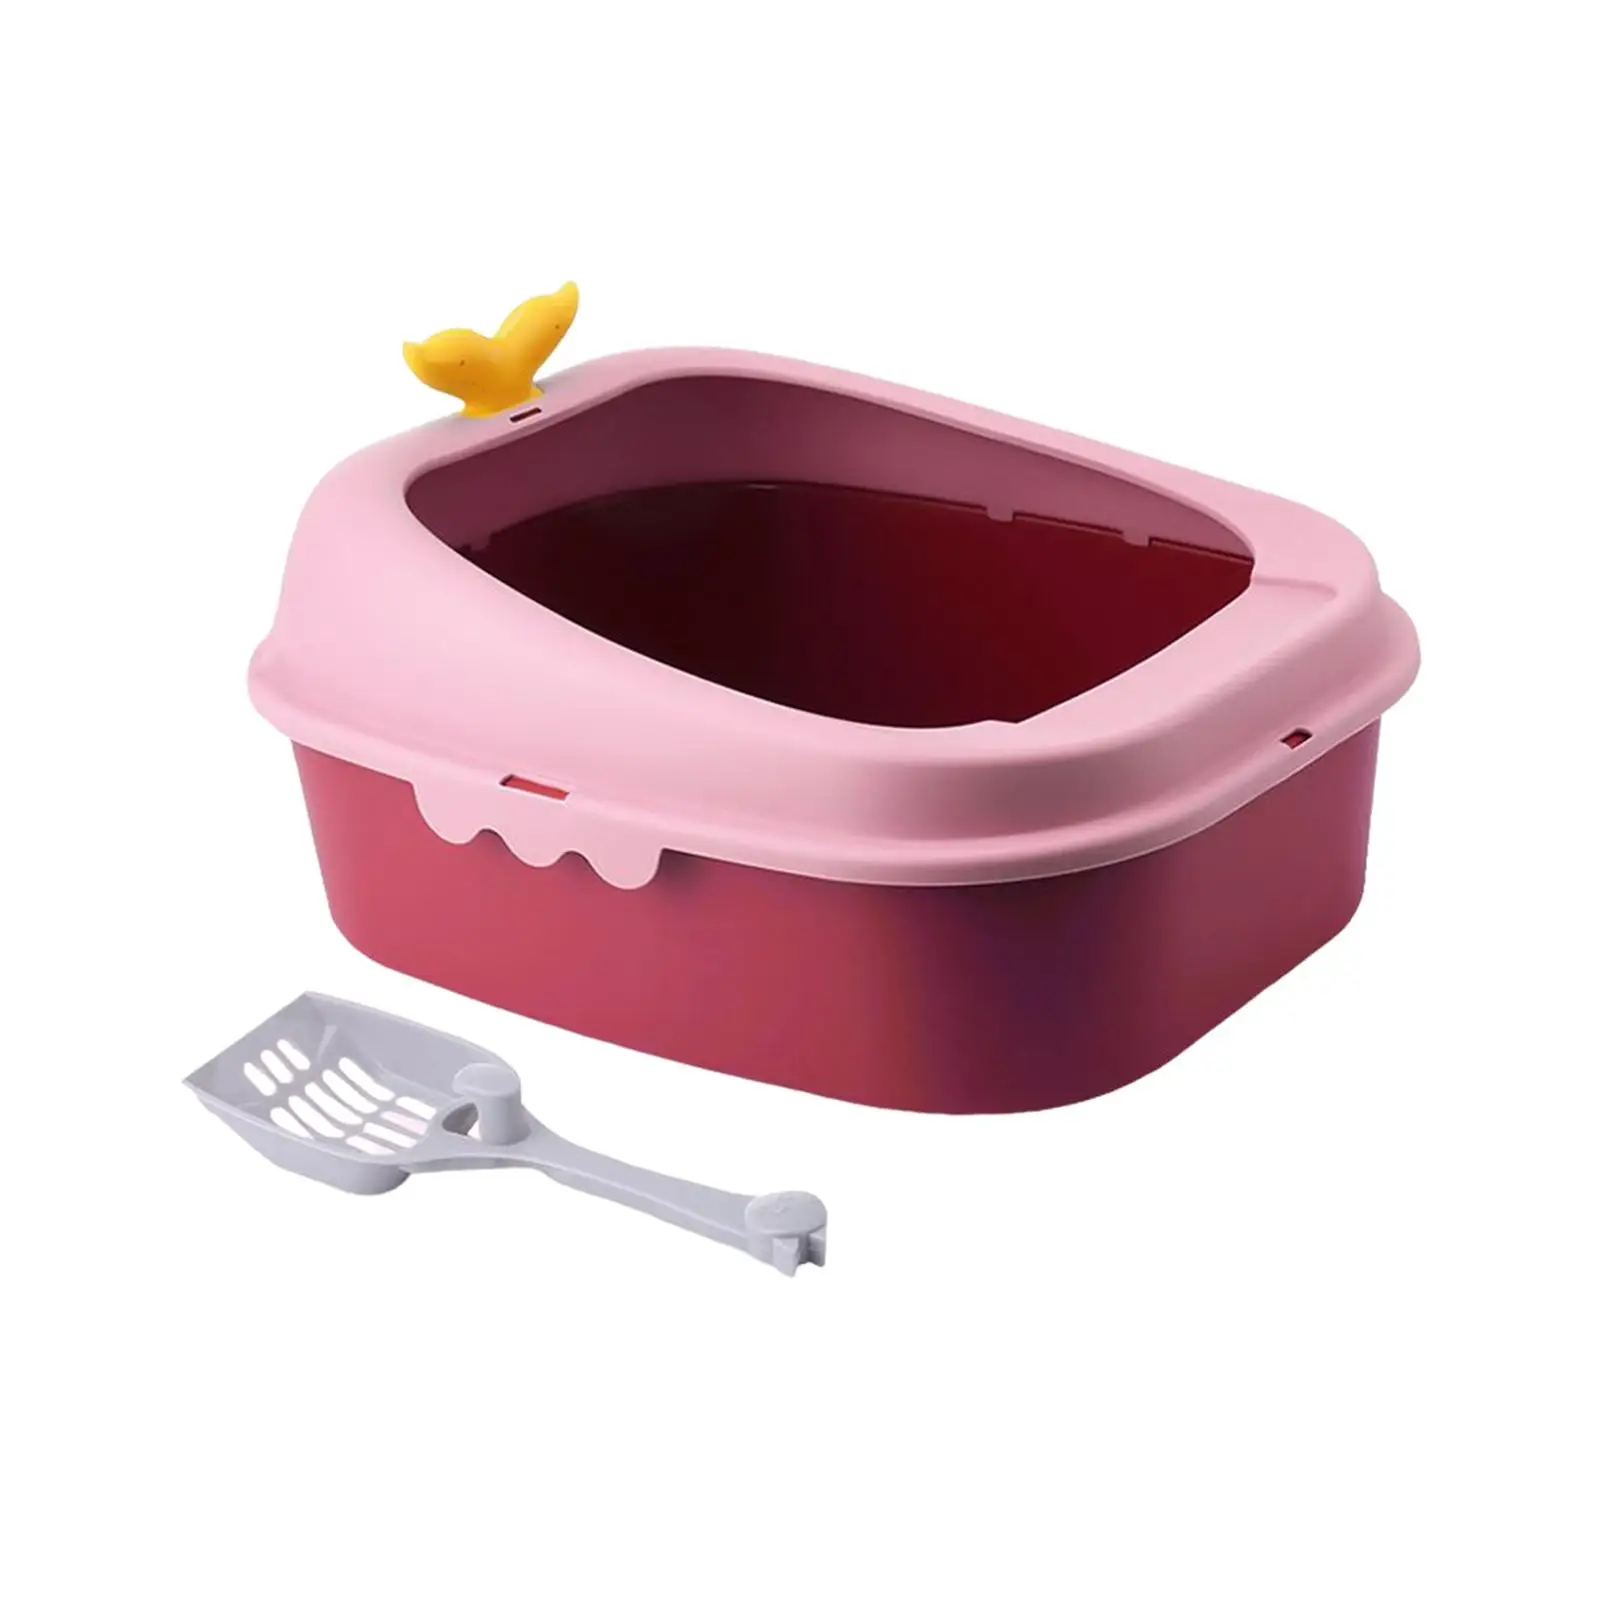 Kitten Potty Toilet Open Top Pet Litter Tray PP Cat Litter Tray for Rabbit Small Animals Cats Kittens Easy to Clean and Assemble